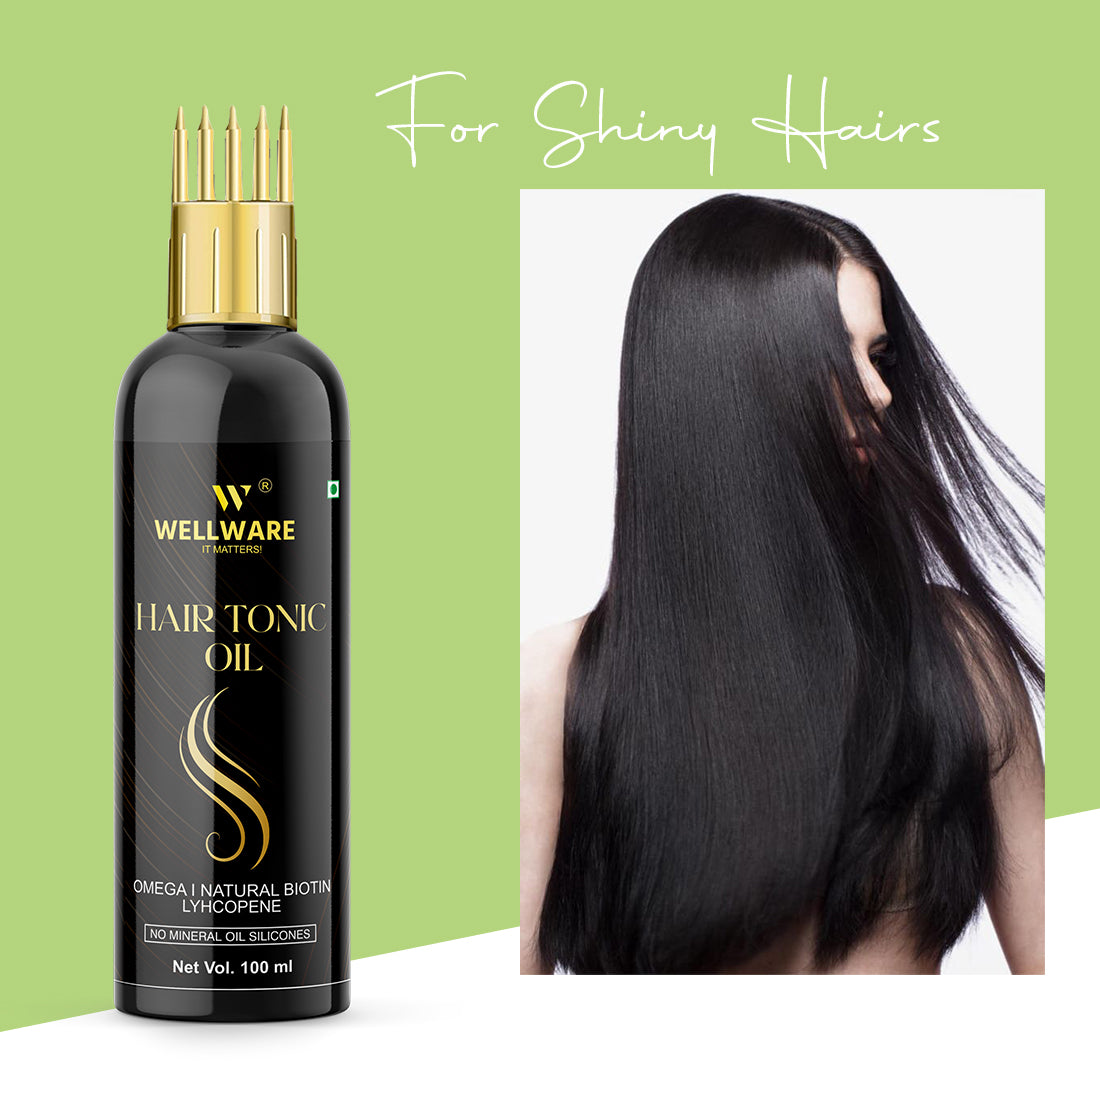 WELLWARE 100 % Pure Hair Tonic Oil - WITH COMB APPLICATOR - Cold Pressed - Hair Regrowth Hair Oil